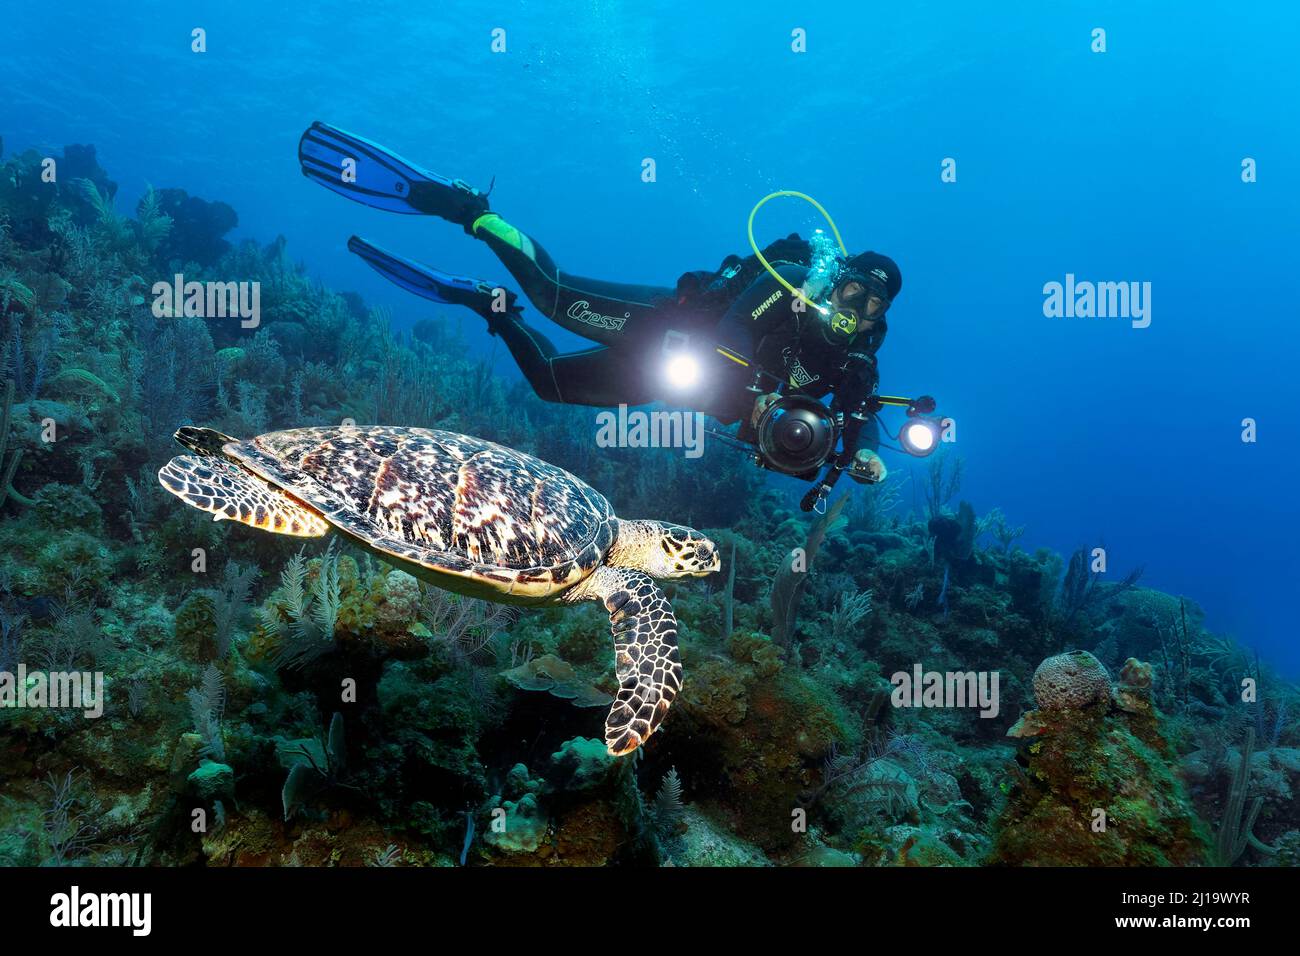 Cuban diver, dive guide with underwater camera swims over coral reef and looks at hawksbill sea turtle (Eretmochelys imbricata), Jardines de la Reina Stock Photo